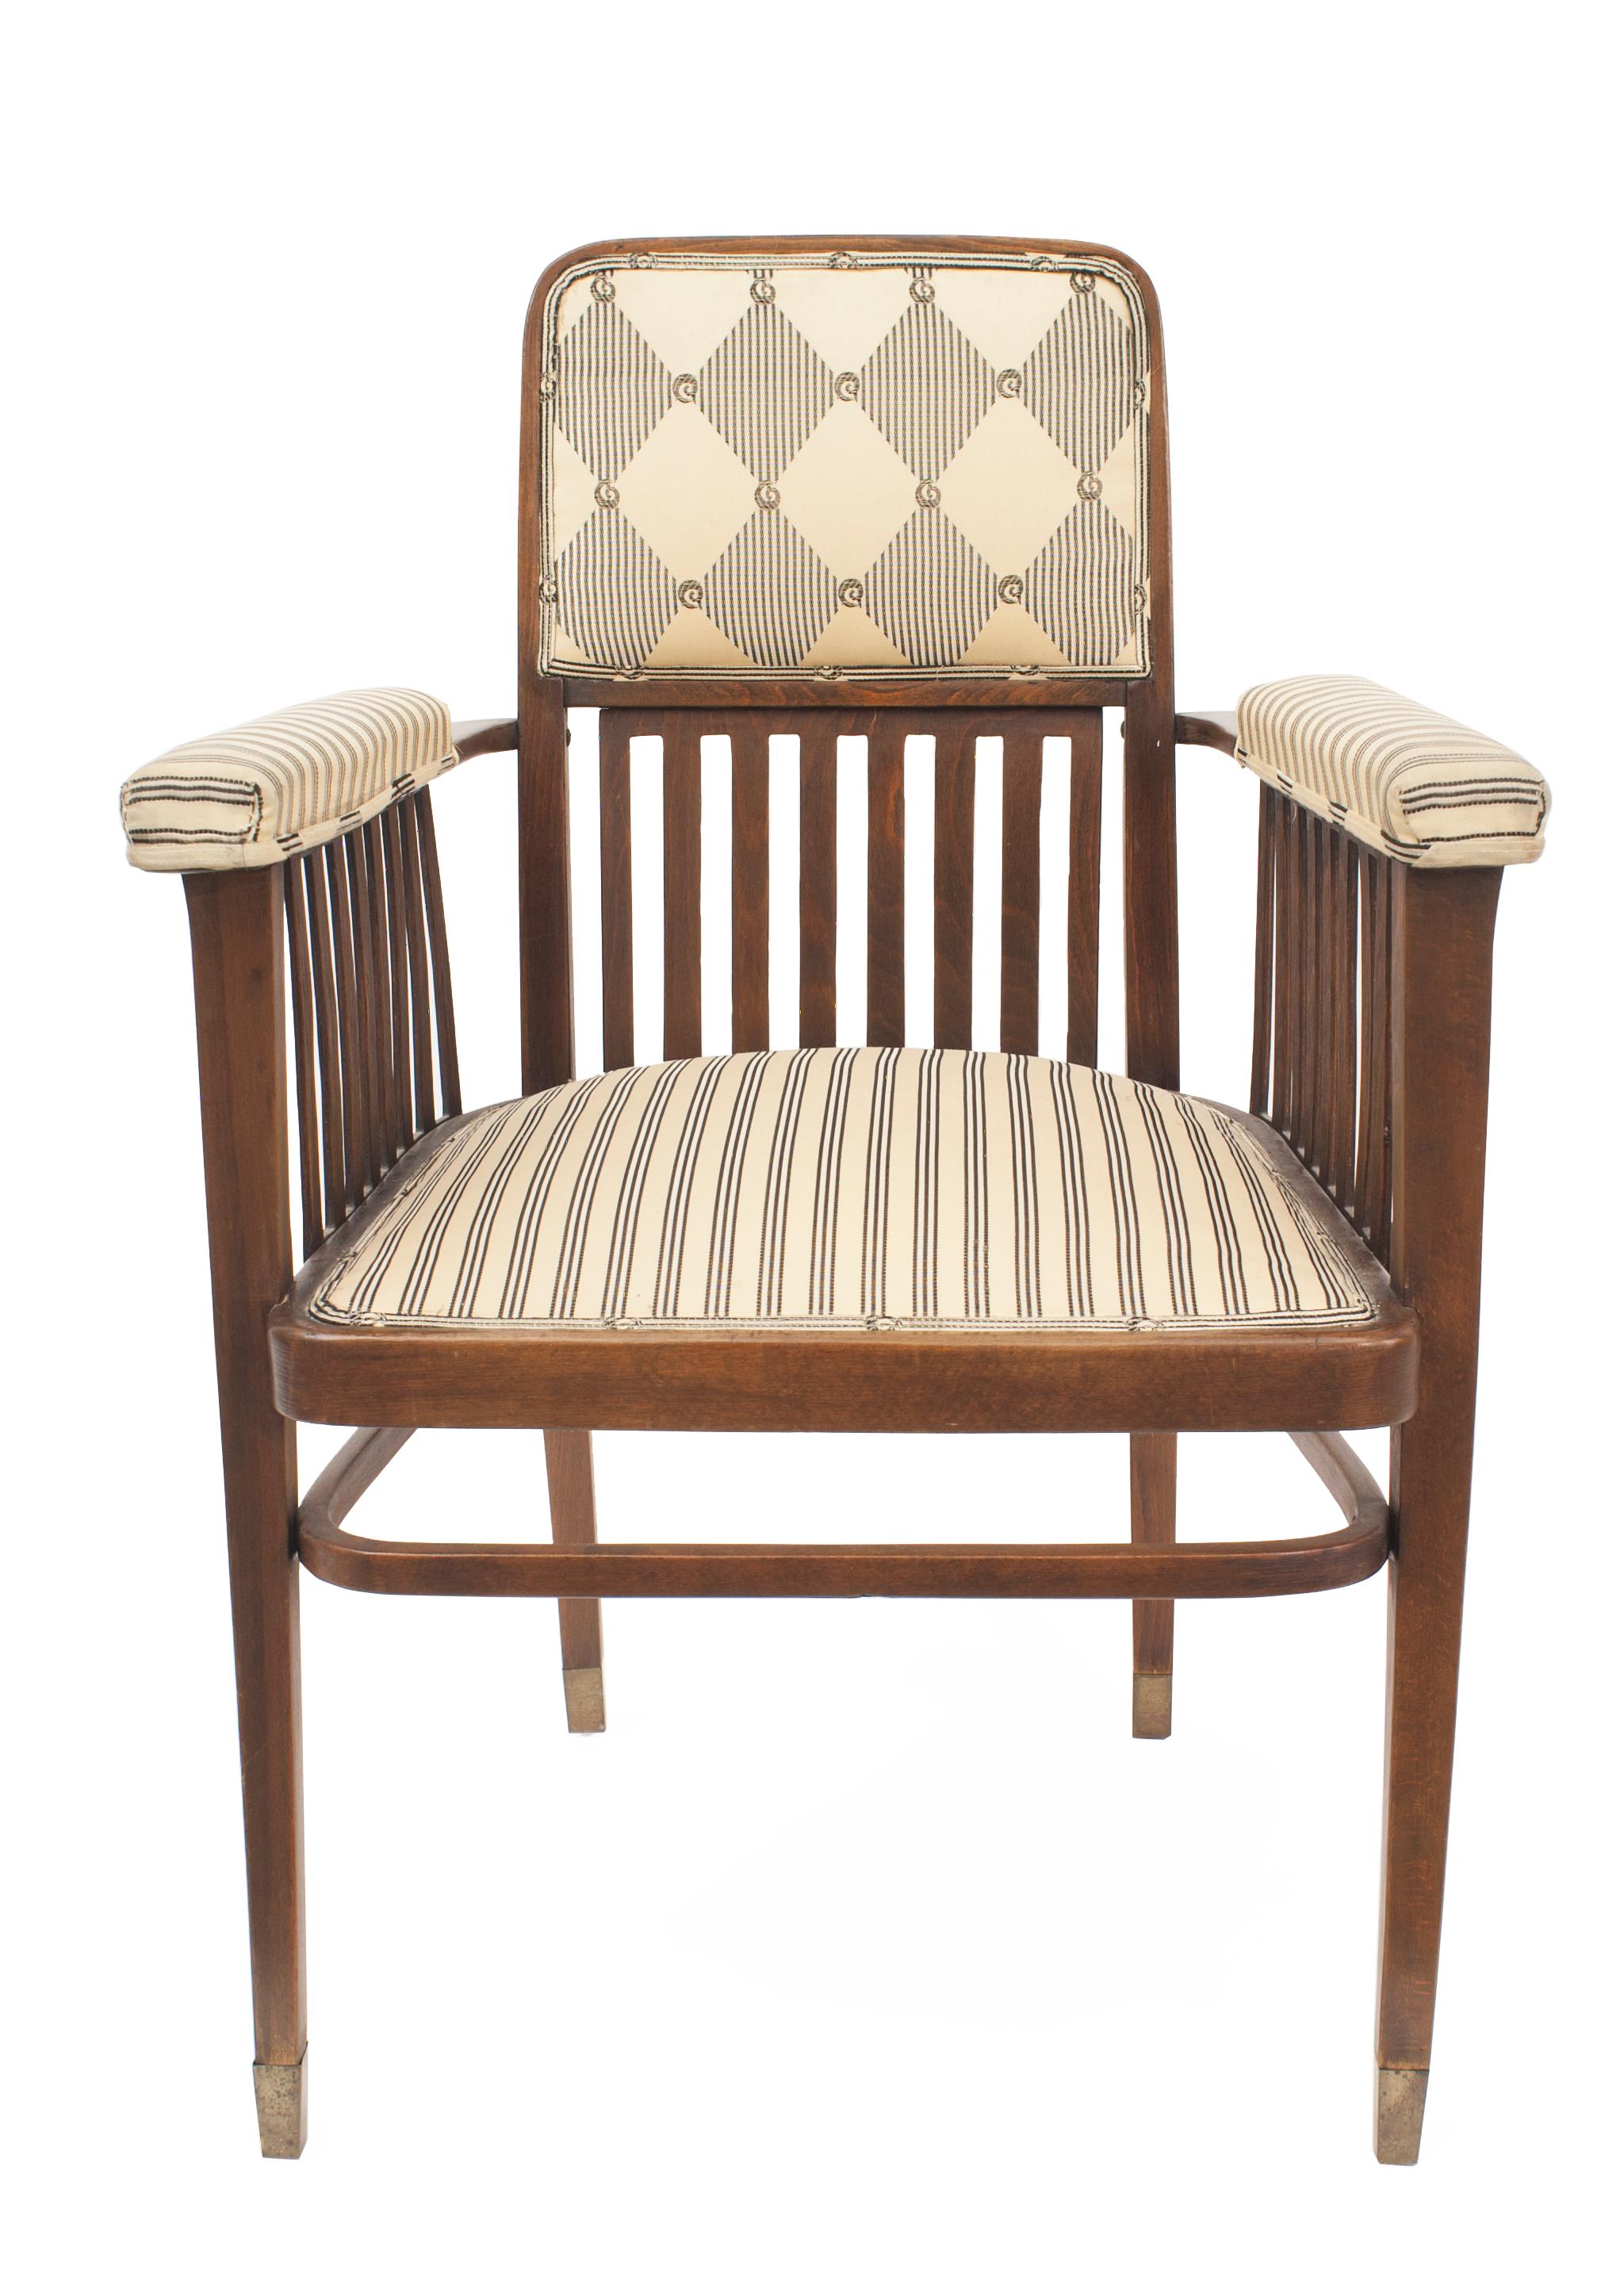 Pair of Austrian Bentwood (Secessionist) beech wood Armchairs with slat design & upholstered seat & back (J&J KOHN paper label under seat) (Matching loveseat: JOH021)
